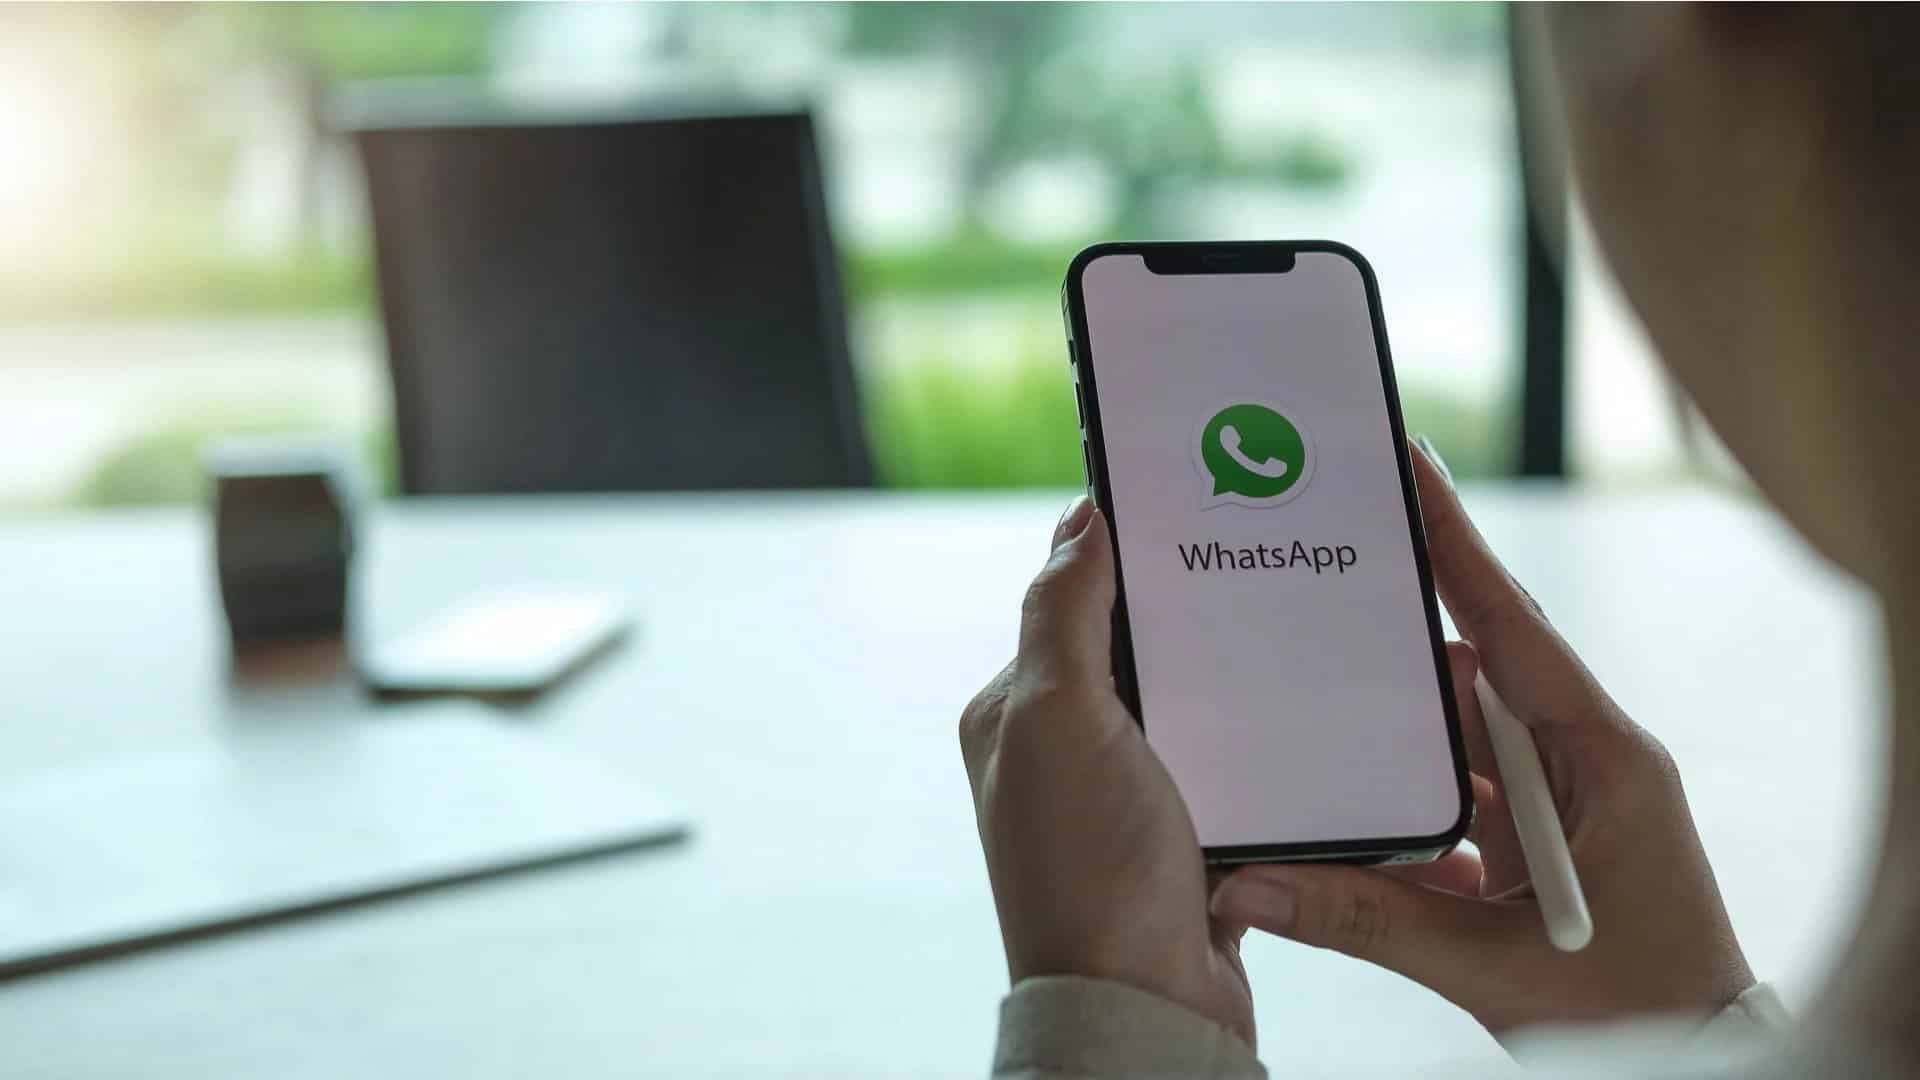 finally!  WhatsApp releases Picture-in-picture mode on iOS to the delight of users